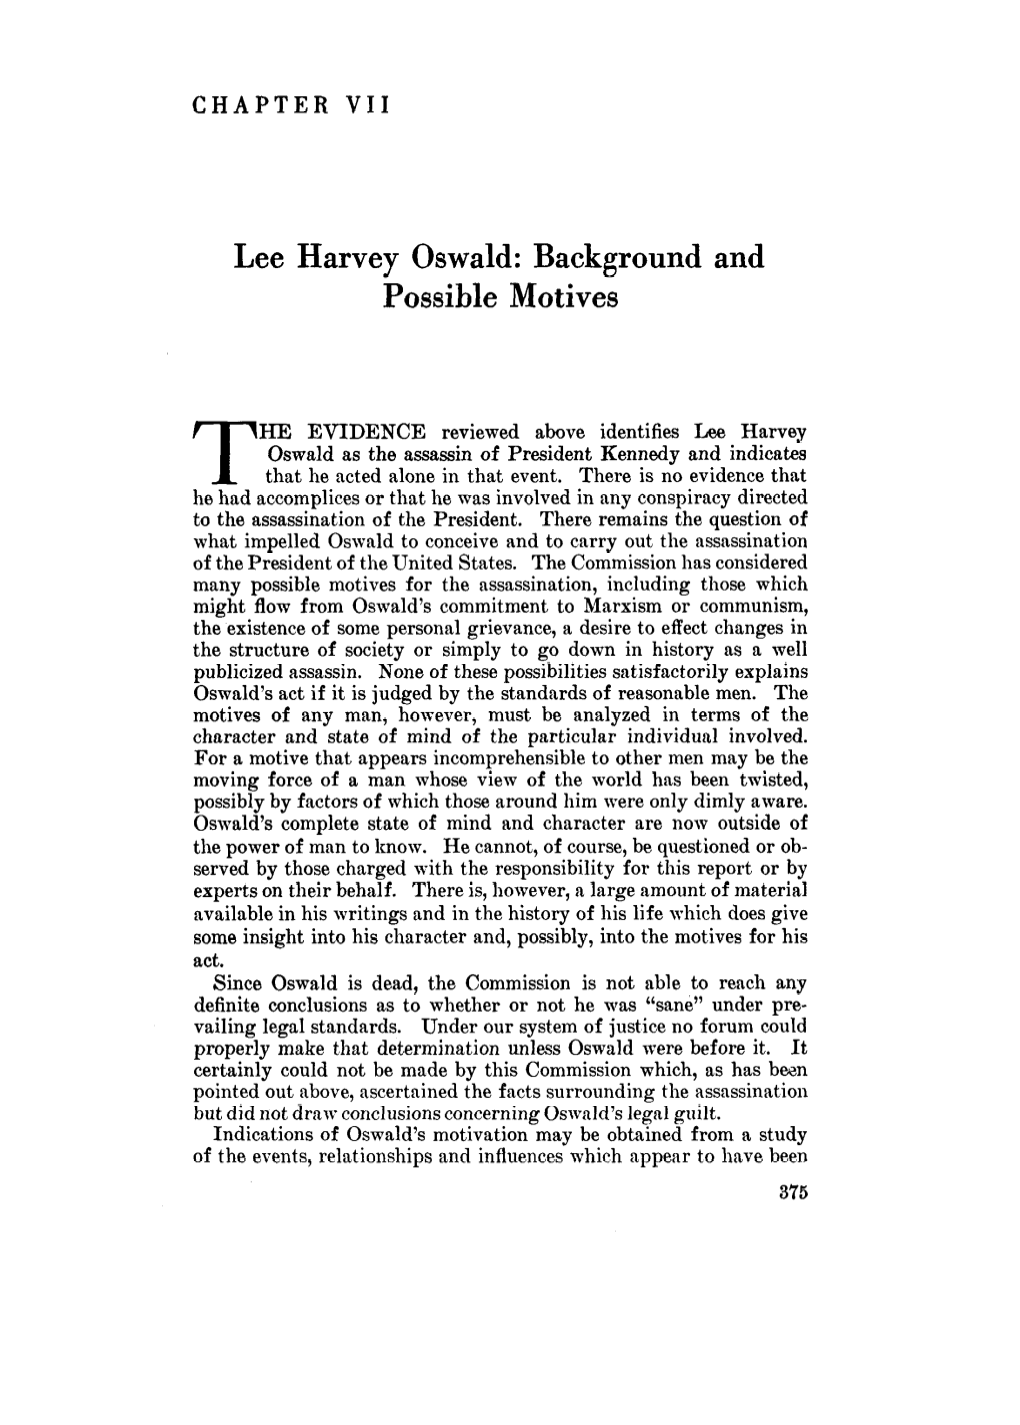 Chapter VII. Lee Harvey Oswald: Background and Possible Motives